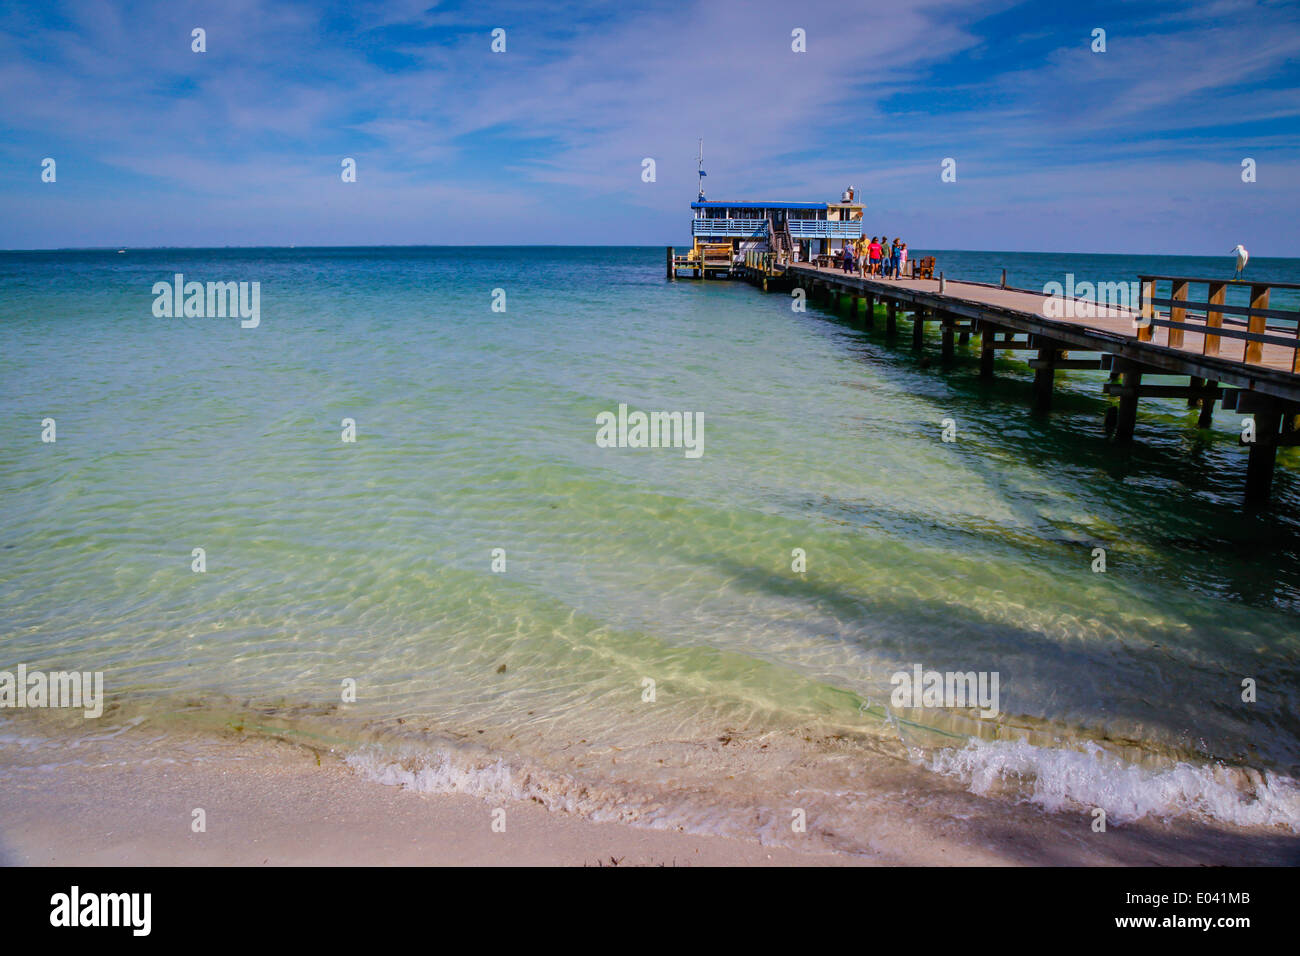 The Rod & Reel Pier on Anna Maria Island, FL surrounded by the Gulf of Mexico Stock Photo